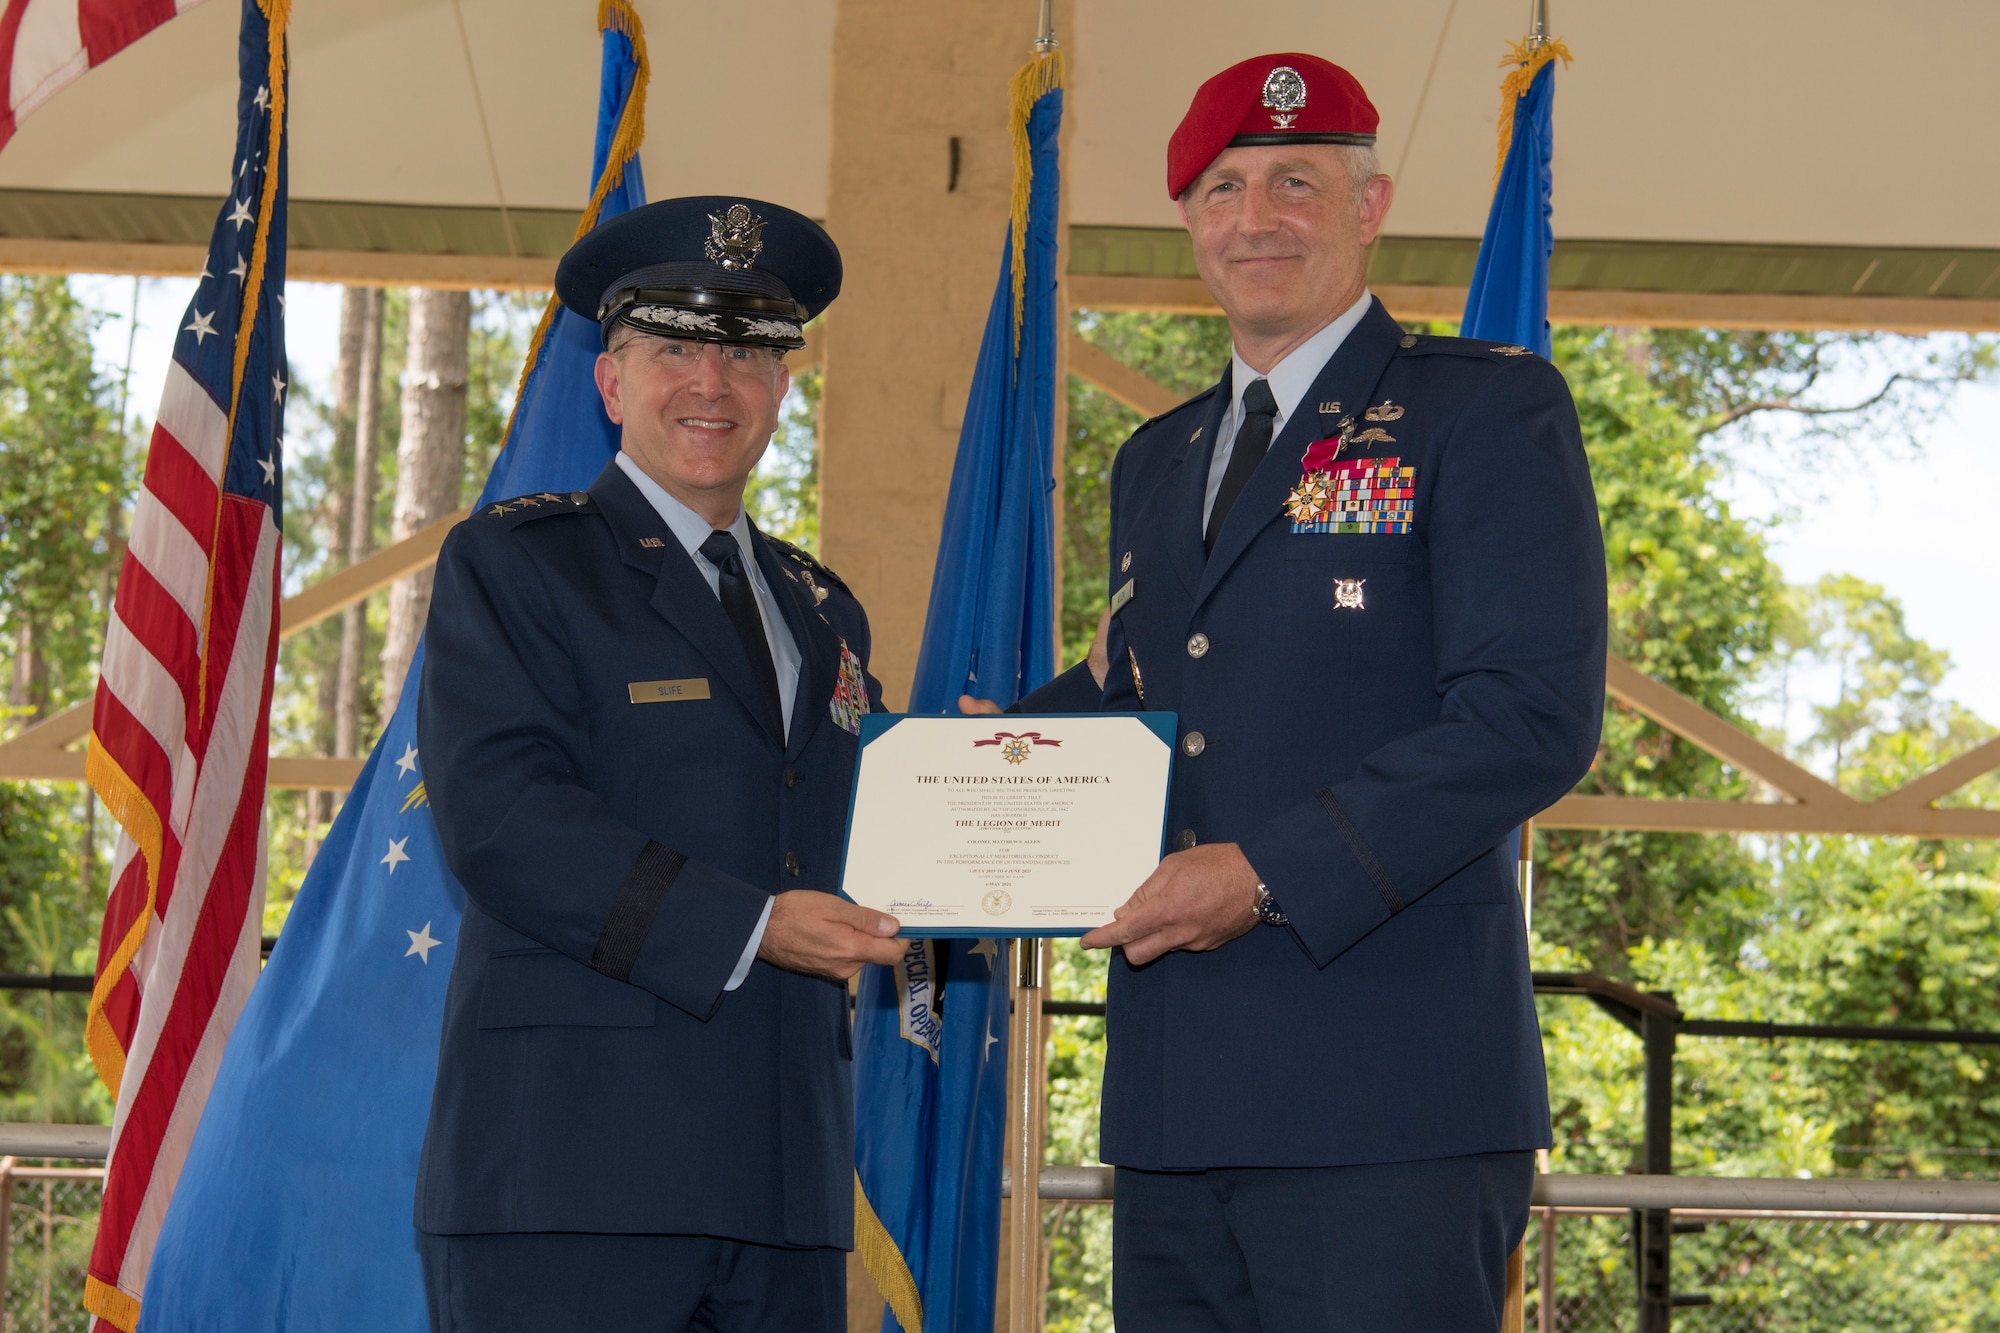 U.S. Air Force Col. Matthew Allen, outgoing commander of the 24th Special Operations Wing, receives the Legion of Merit from U.S. Air Force Lt. Gen. Jim Slife, commander of Air Force Special Operations Command, during a change of command ceremony at Hurlburt Field, Florida, June 4, 2021.